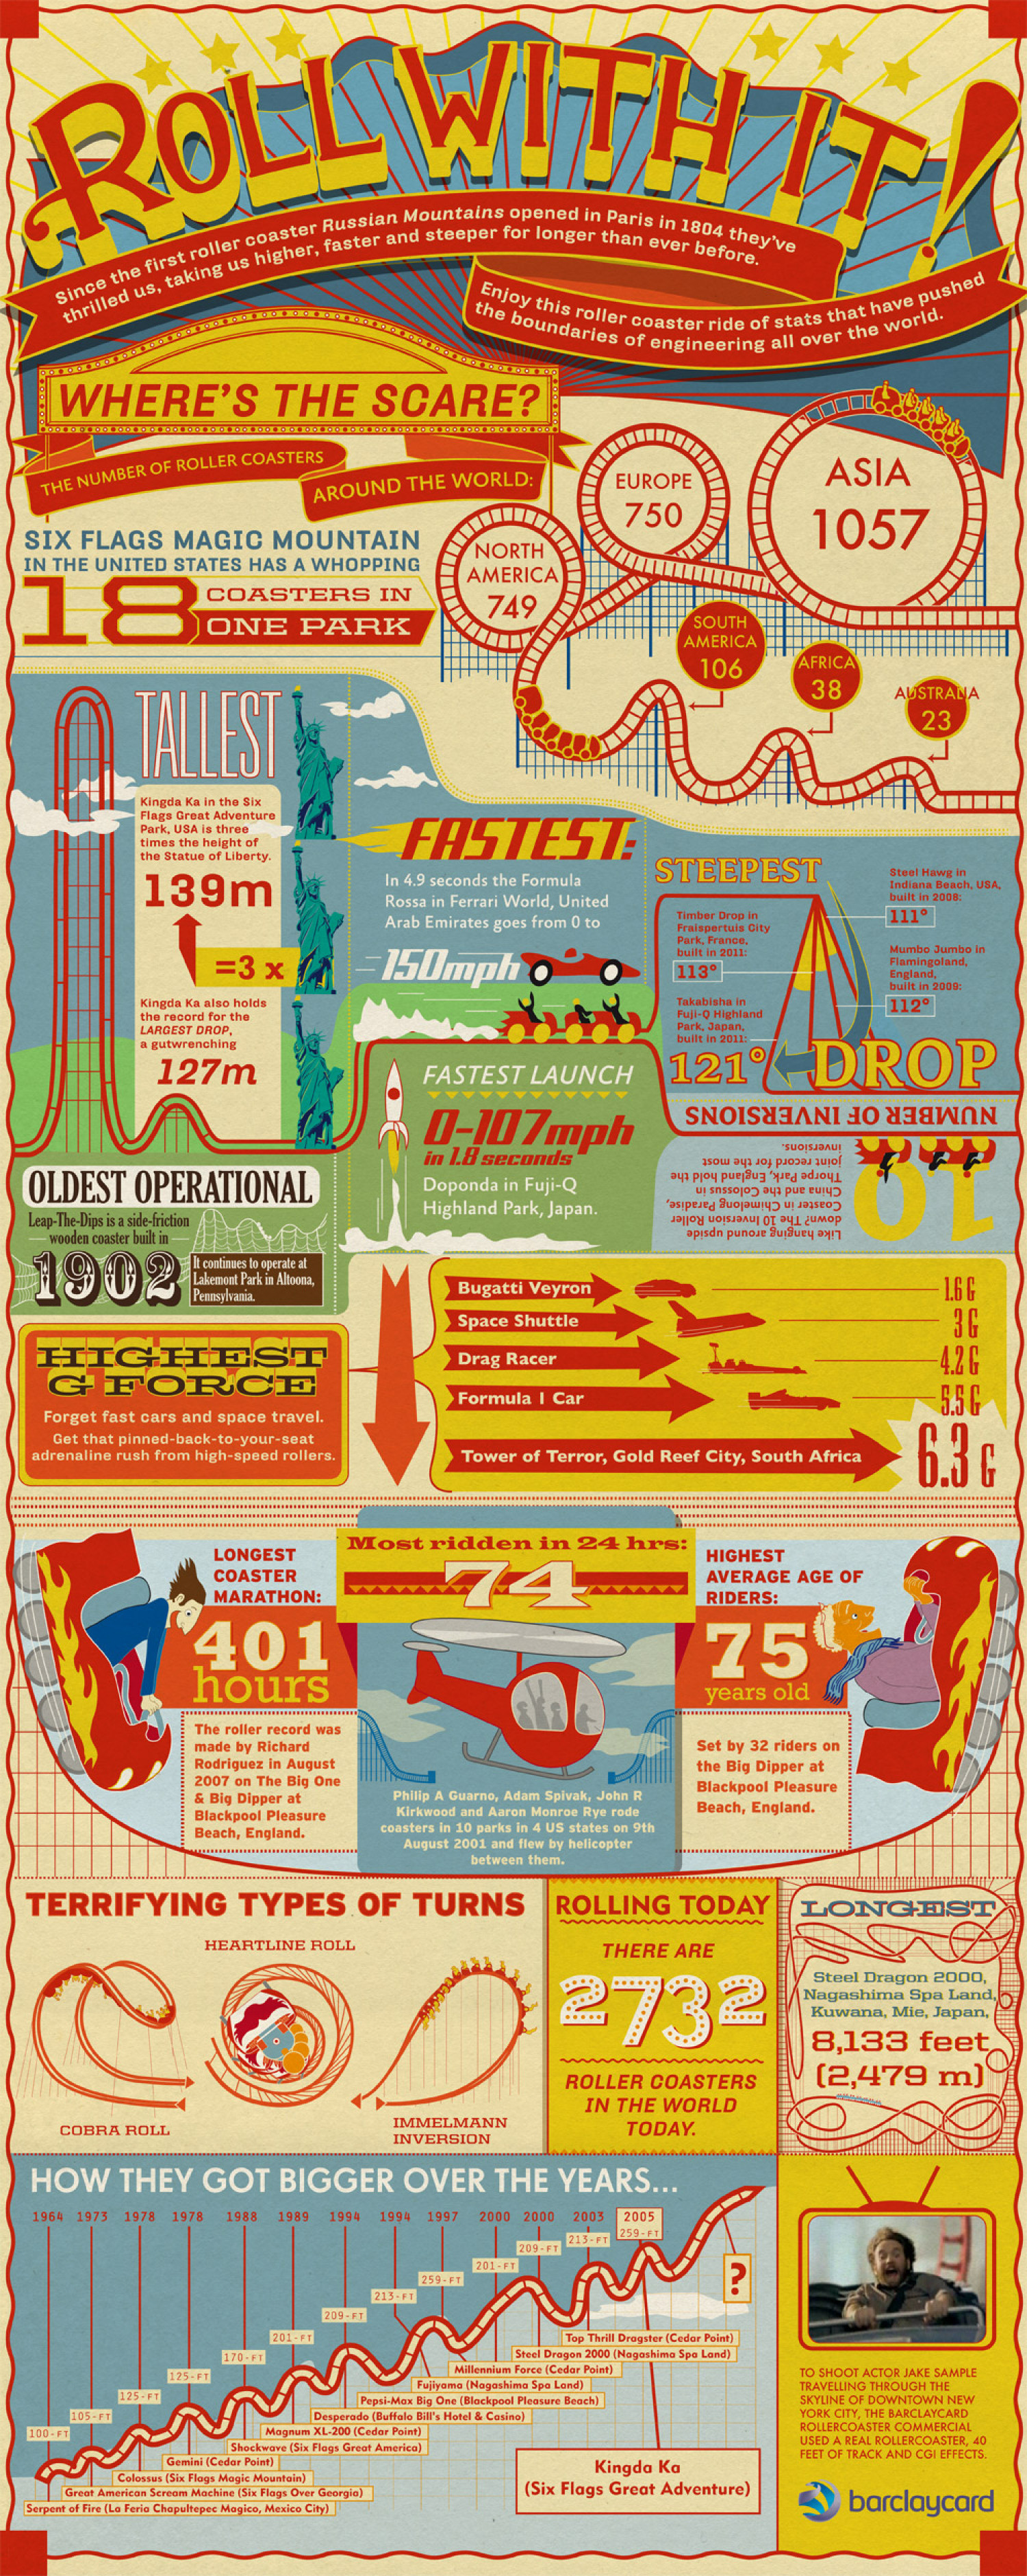 Roll With It! Infographic